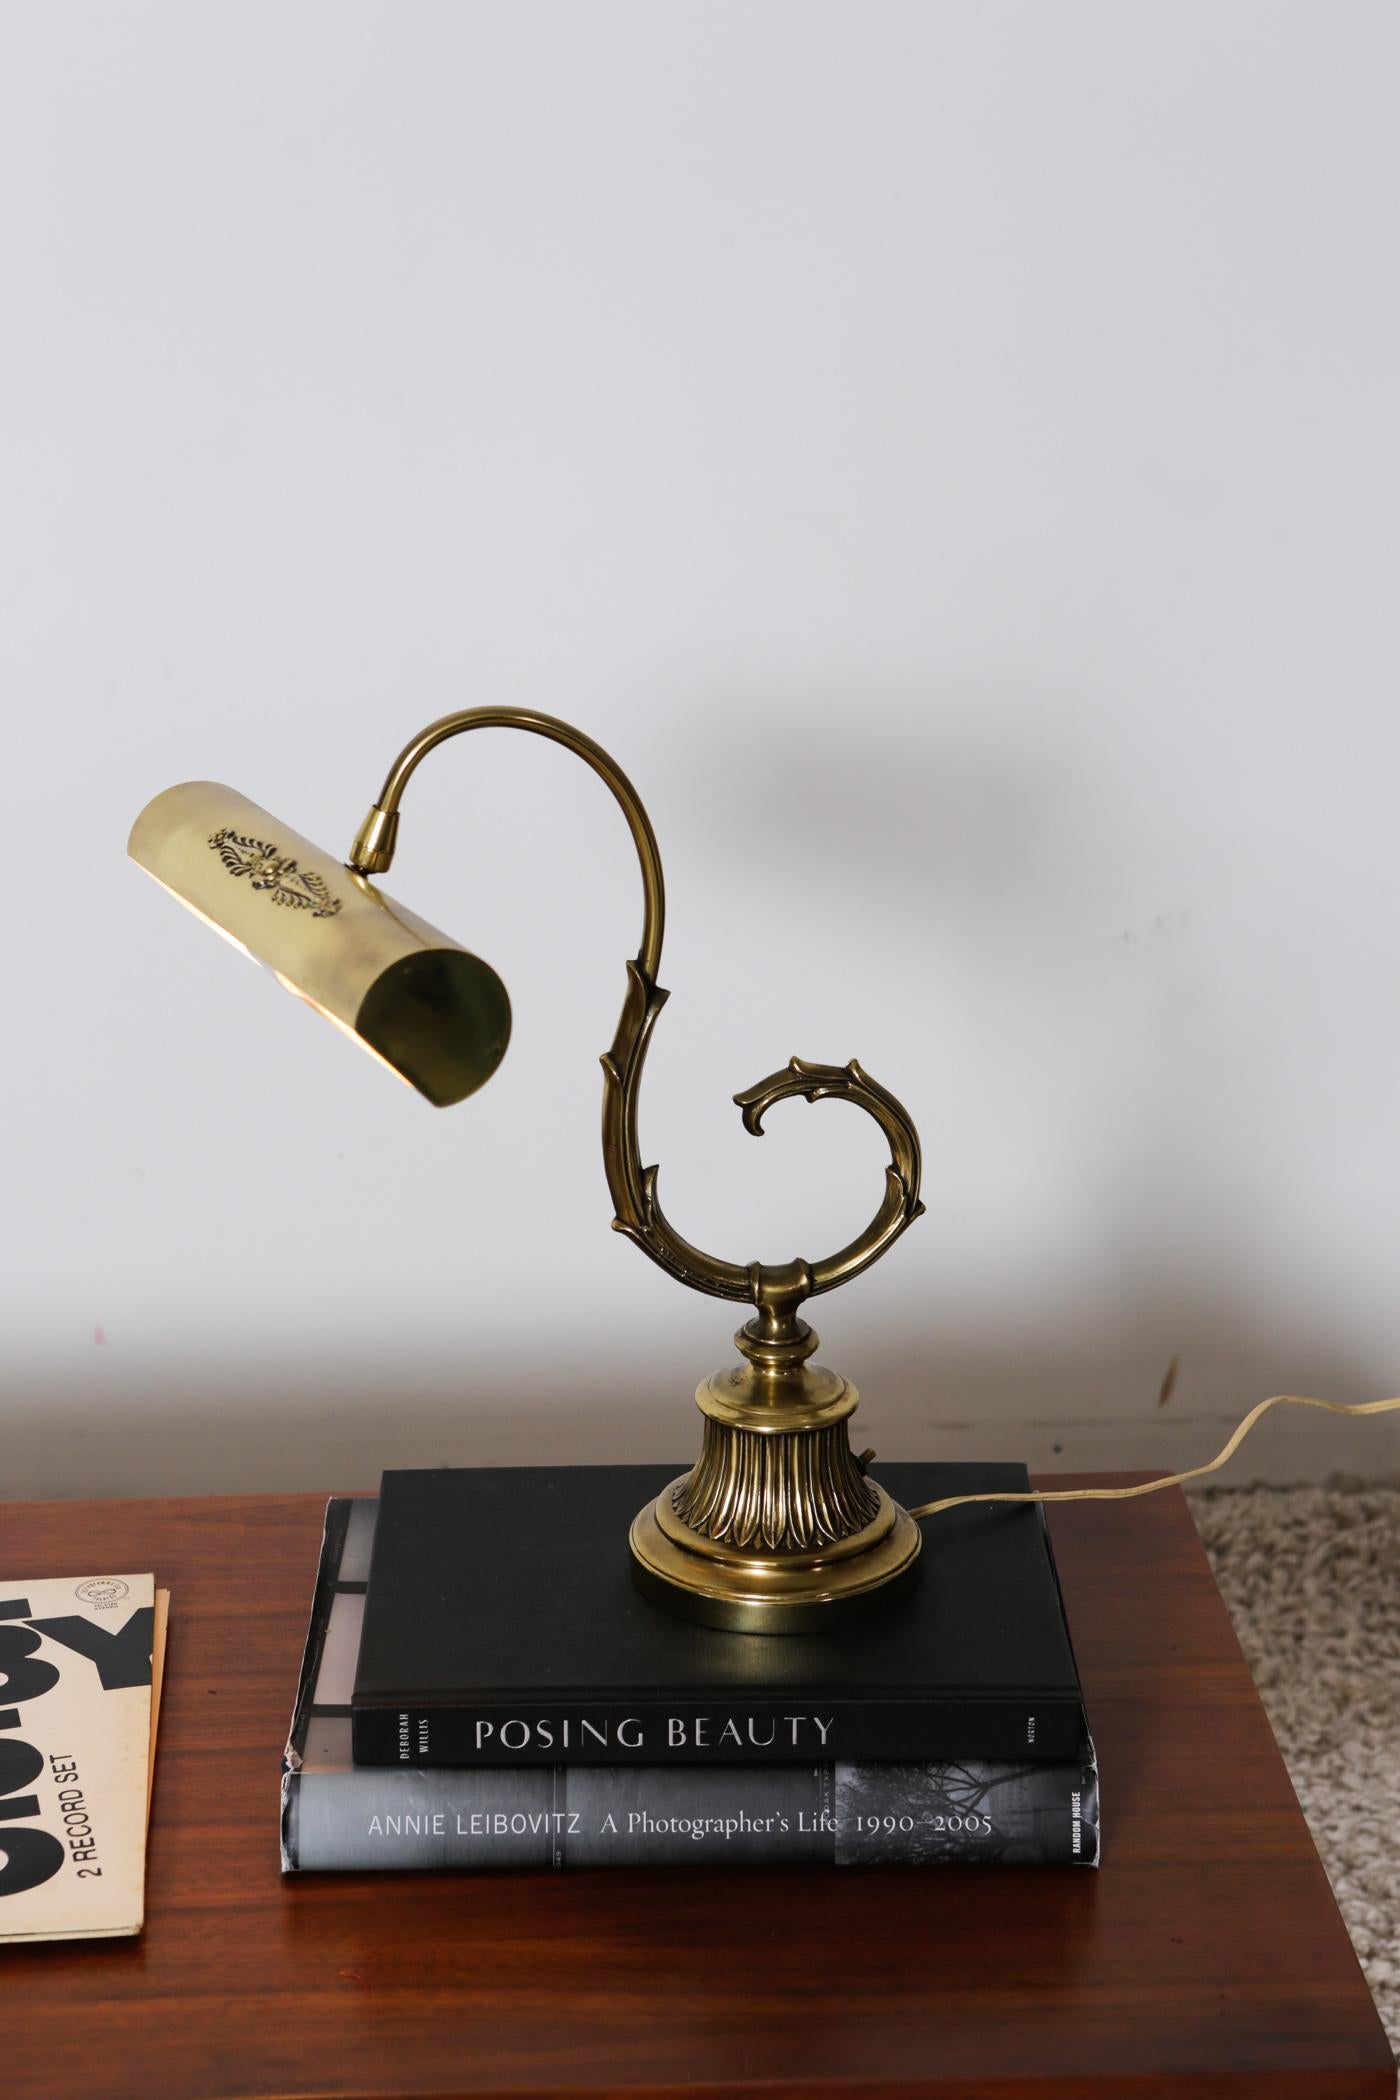 Original 1920s mid century bronze desk lamp.

This elegant but simple desk lamp stands on a heavy, sculpted bronze foot and an exquisite curved stem. The details that doesn’t exist these days.The head of the lamp is connected with a ball